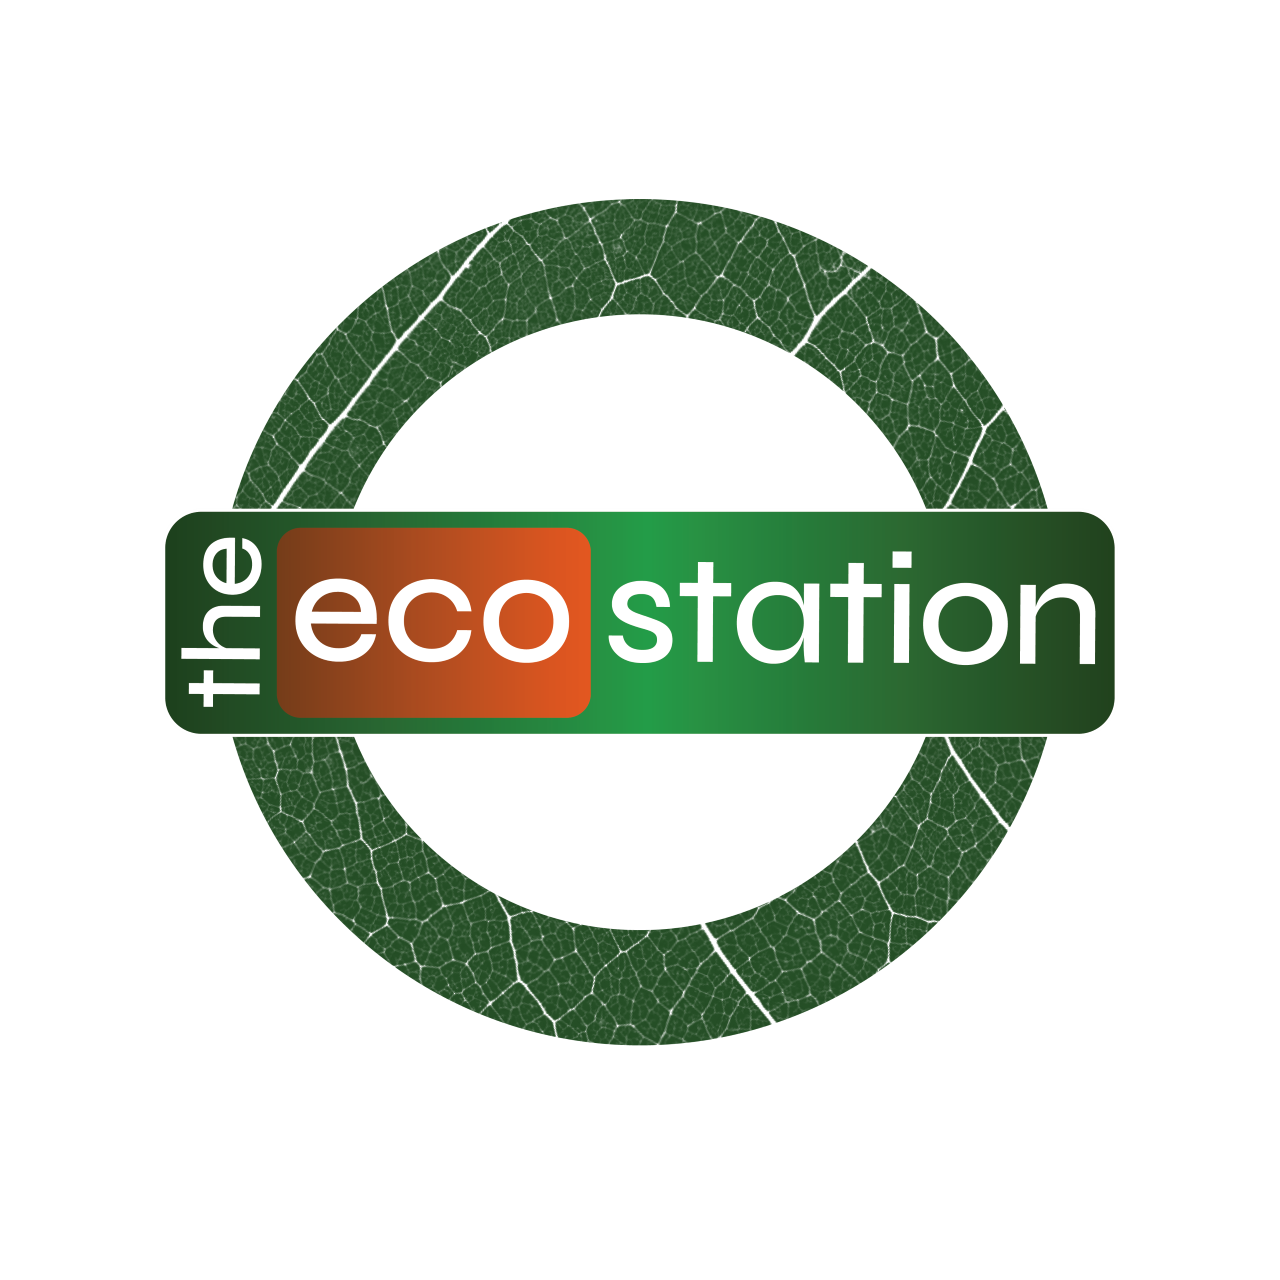 The Eco Station